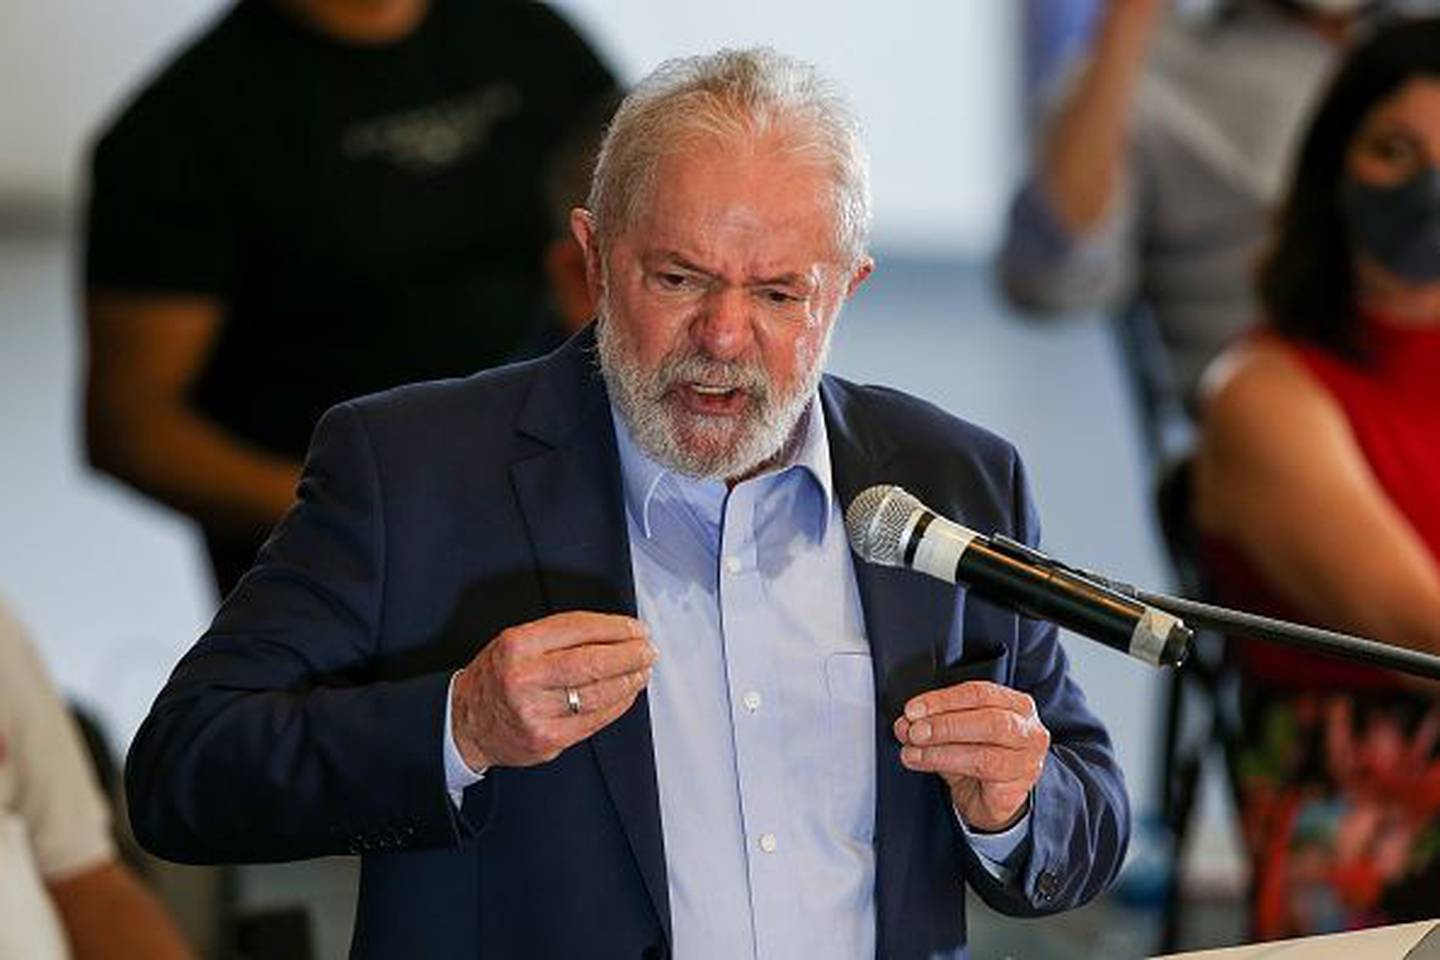 Lula Da Silva in March 2021 after his conviction on corruption charges was annulled.dfd